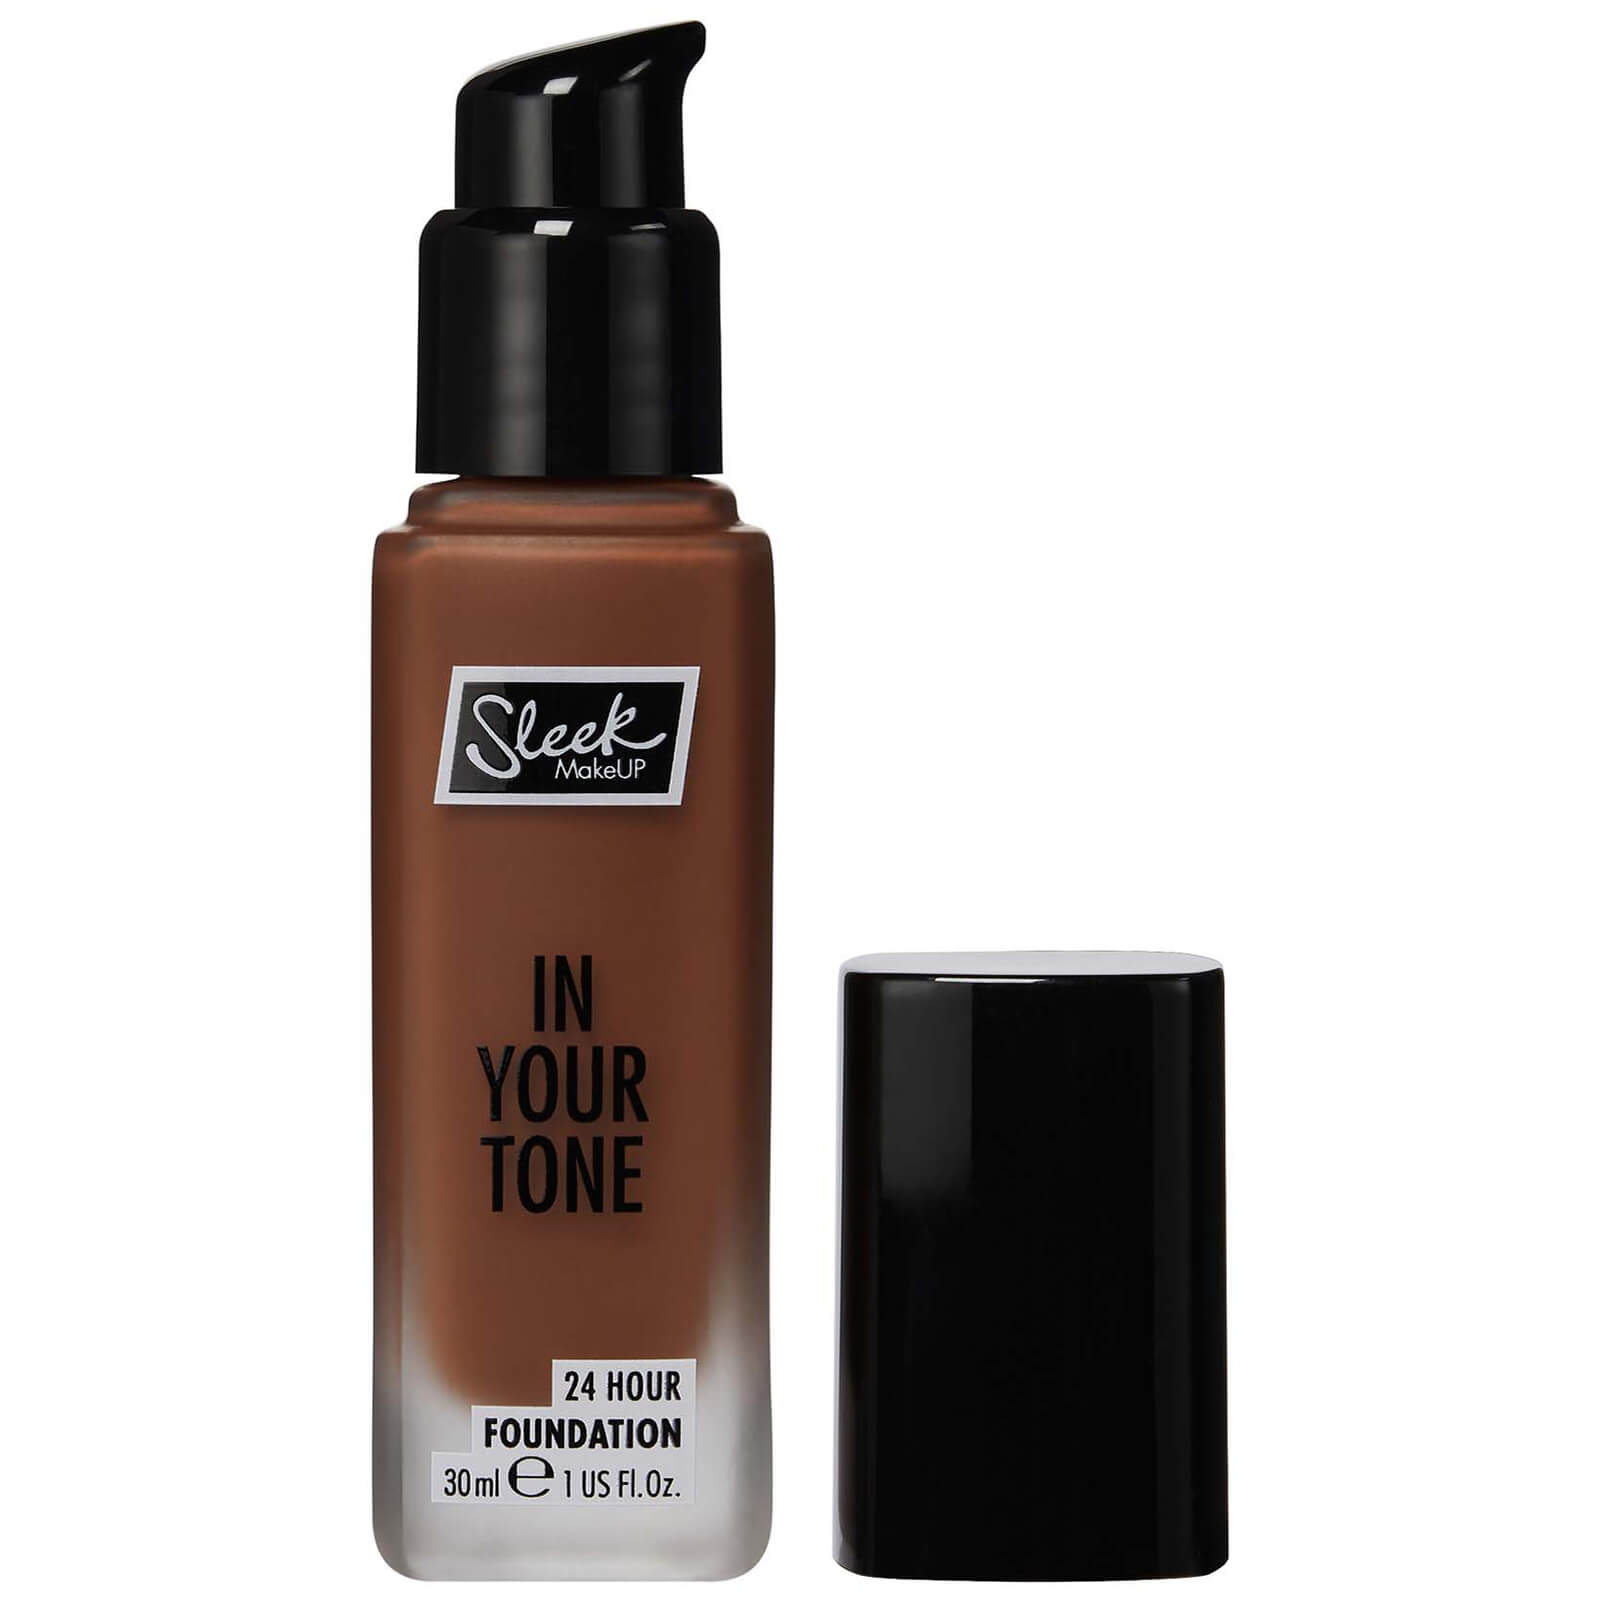 Sleek MakeUP in Your Tone 24 Hour Foundation 30ml (Various Shades) - 12N